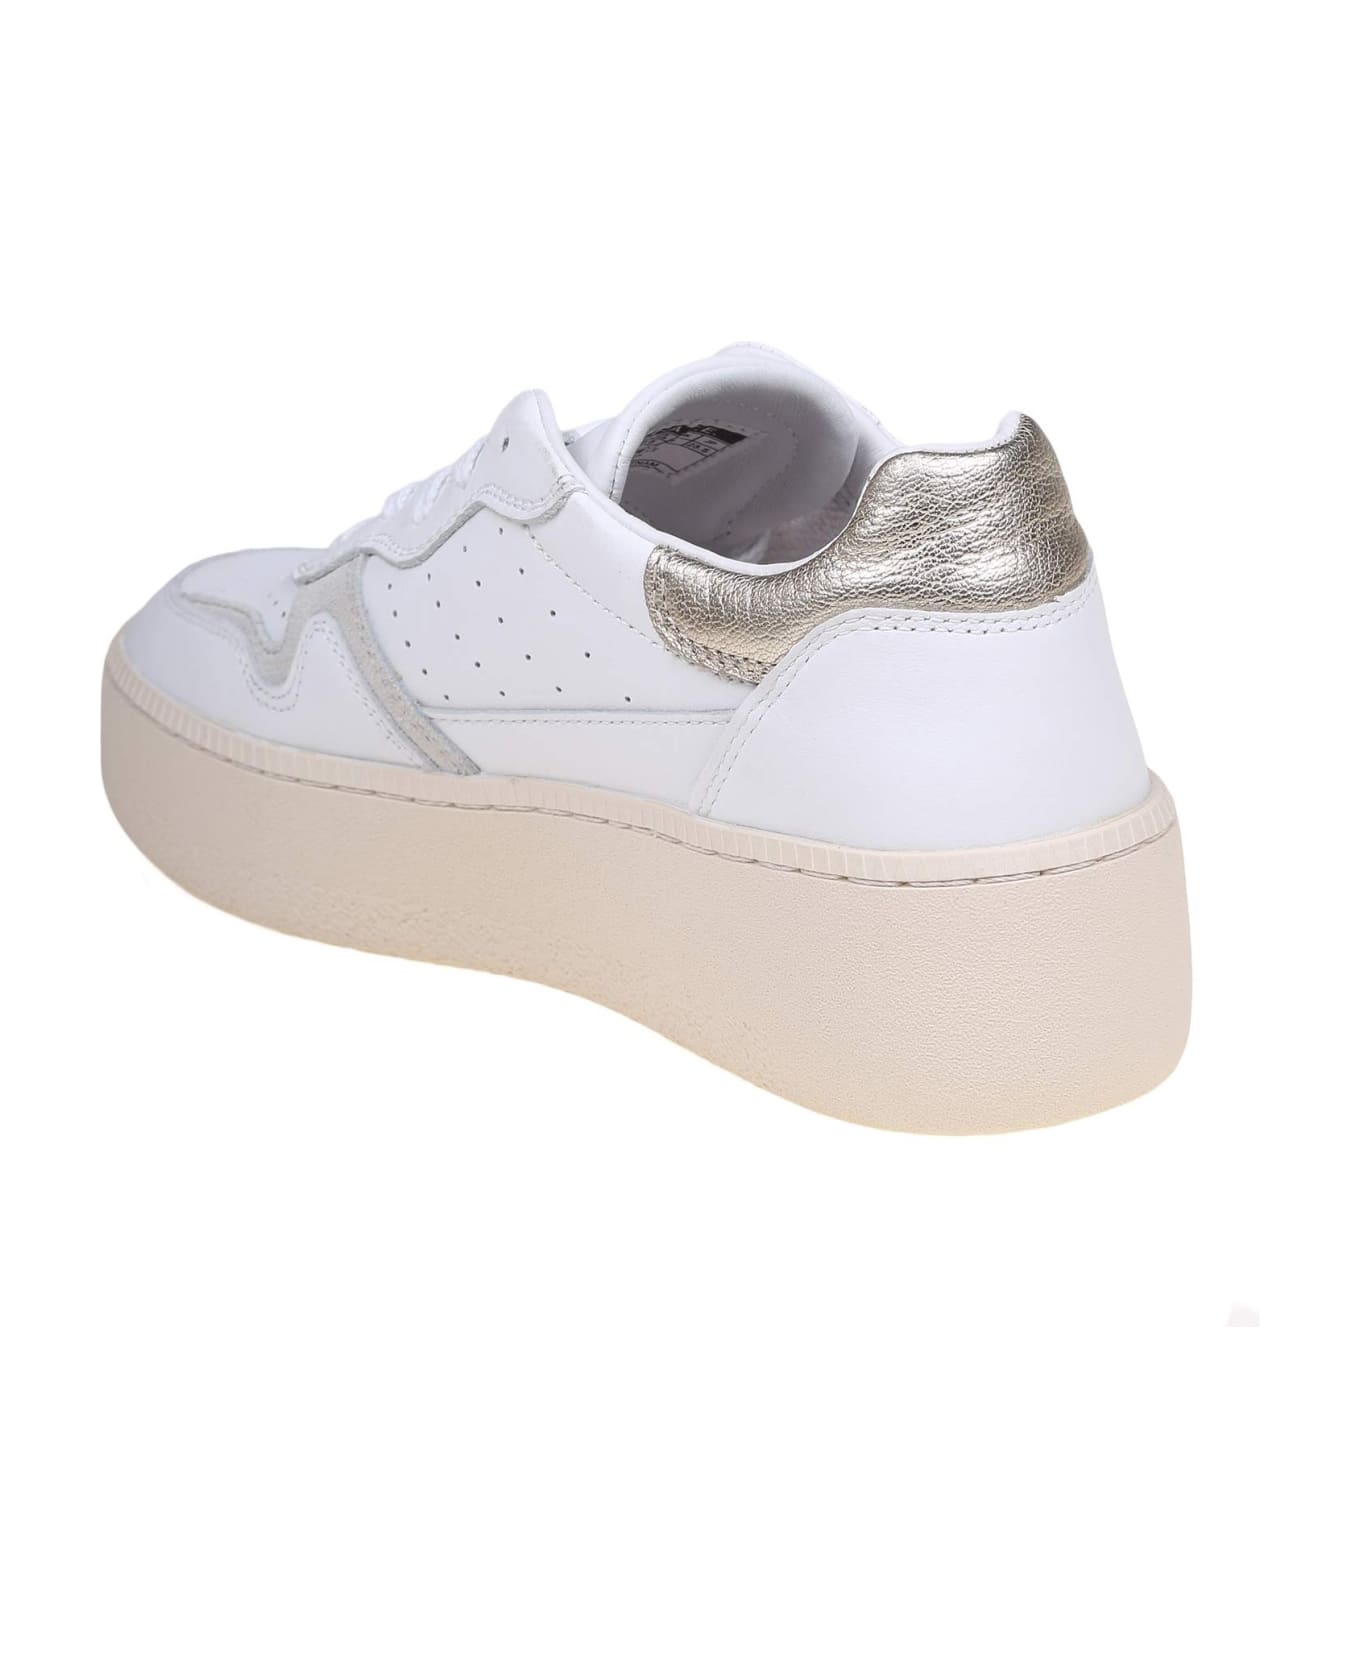 D.A.T.E. Step Sneakers In White Leather - platinum